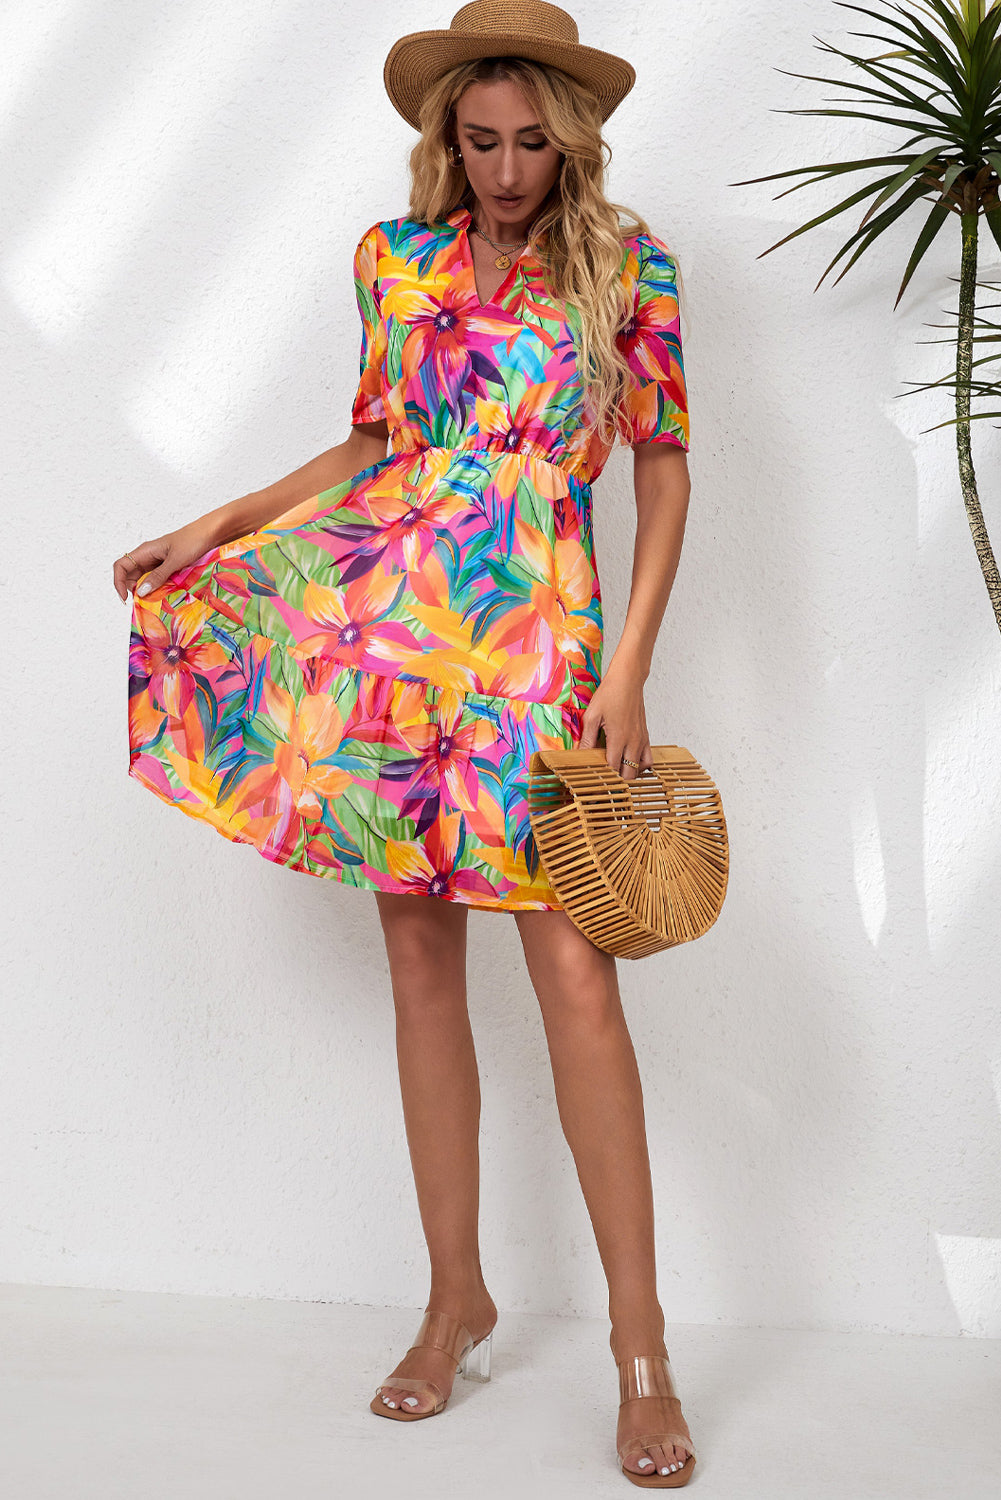 Floral Short Tropical Vacation Dress